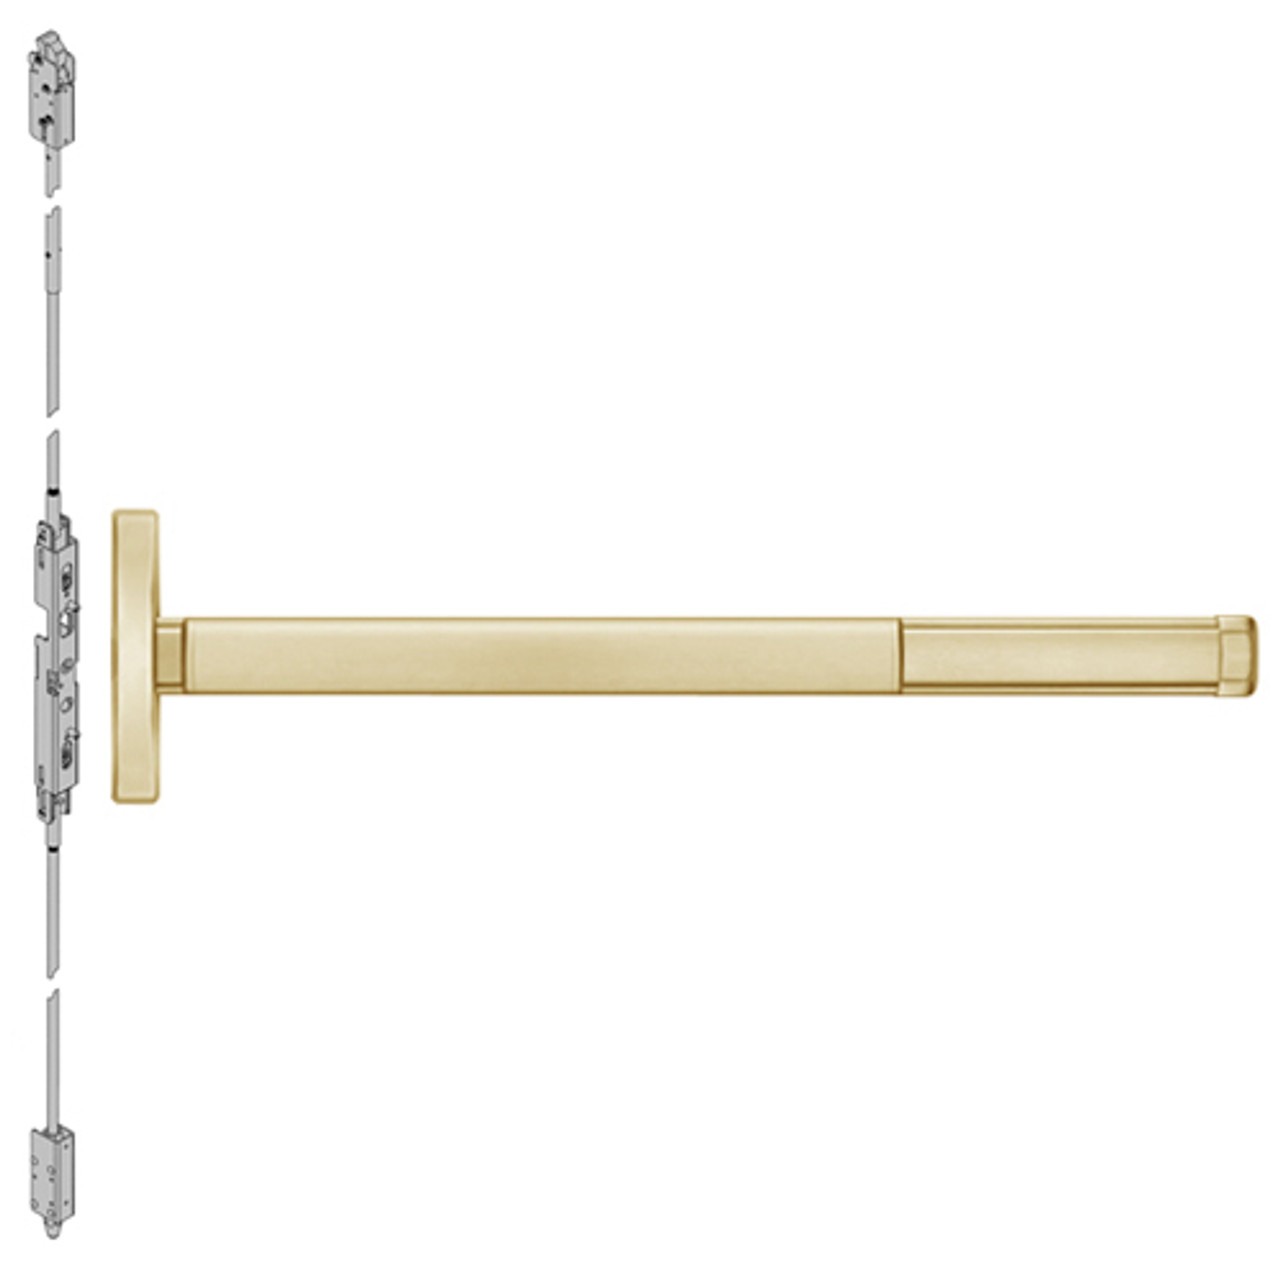 MLR2602-606-48 PHI 2600 Series Concealed Vertical Rod Exit Device with Motorized Latch Retraction Prepped for Dummy Trim in Satin Brass Finish